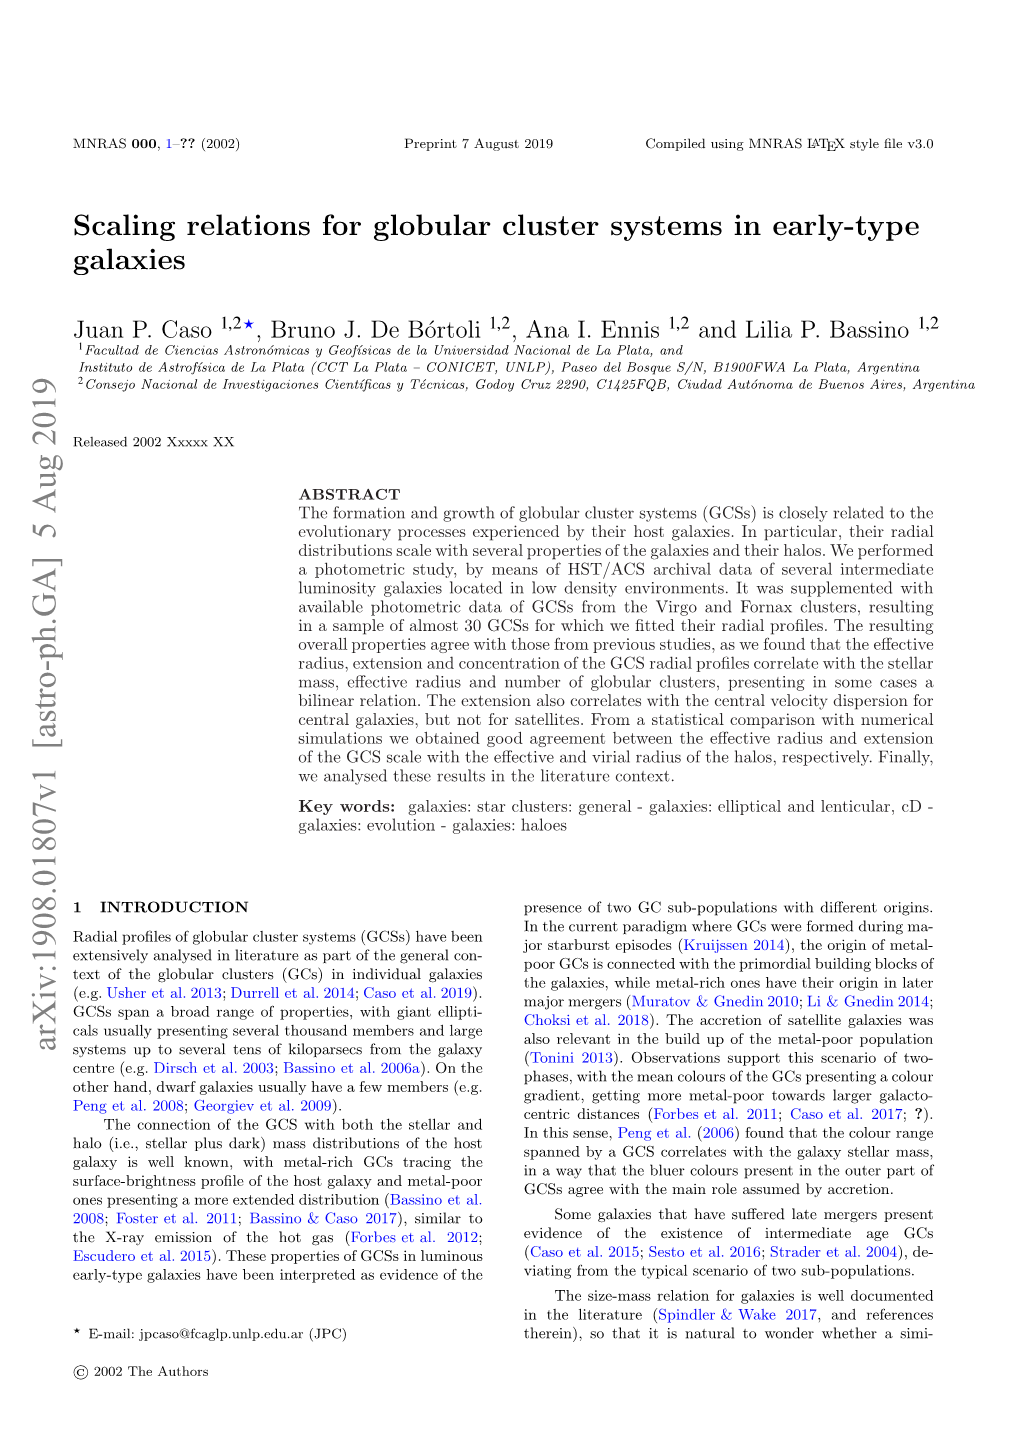 Scaling Relations for Globular Cluster Systems in Early-Type Galaxies